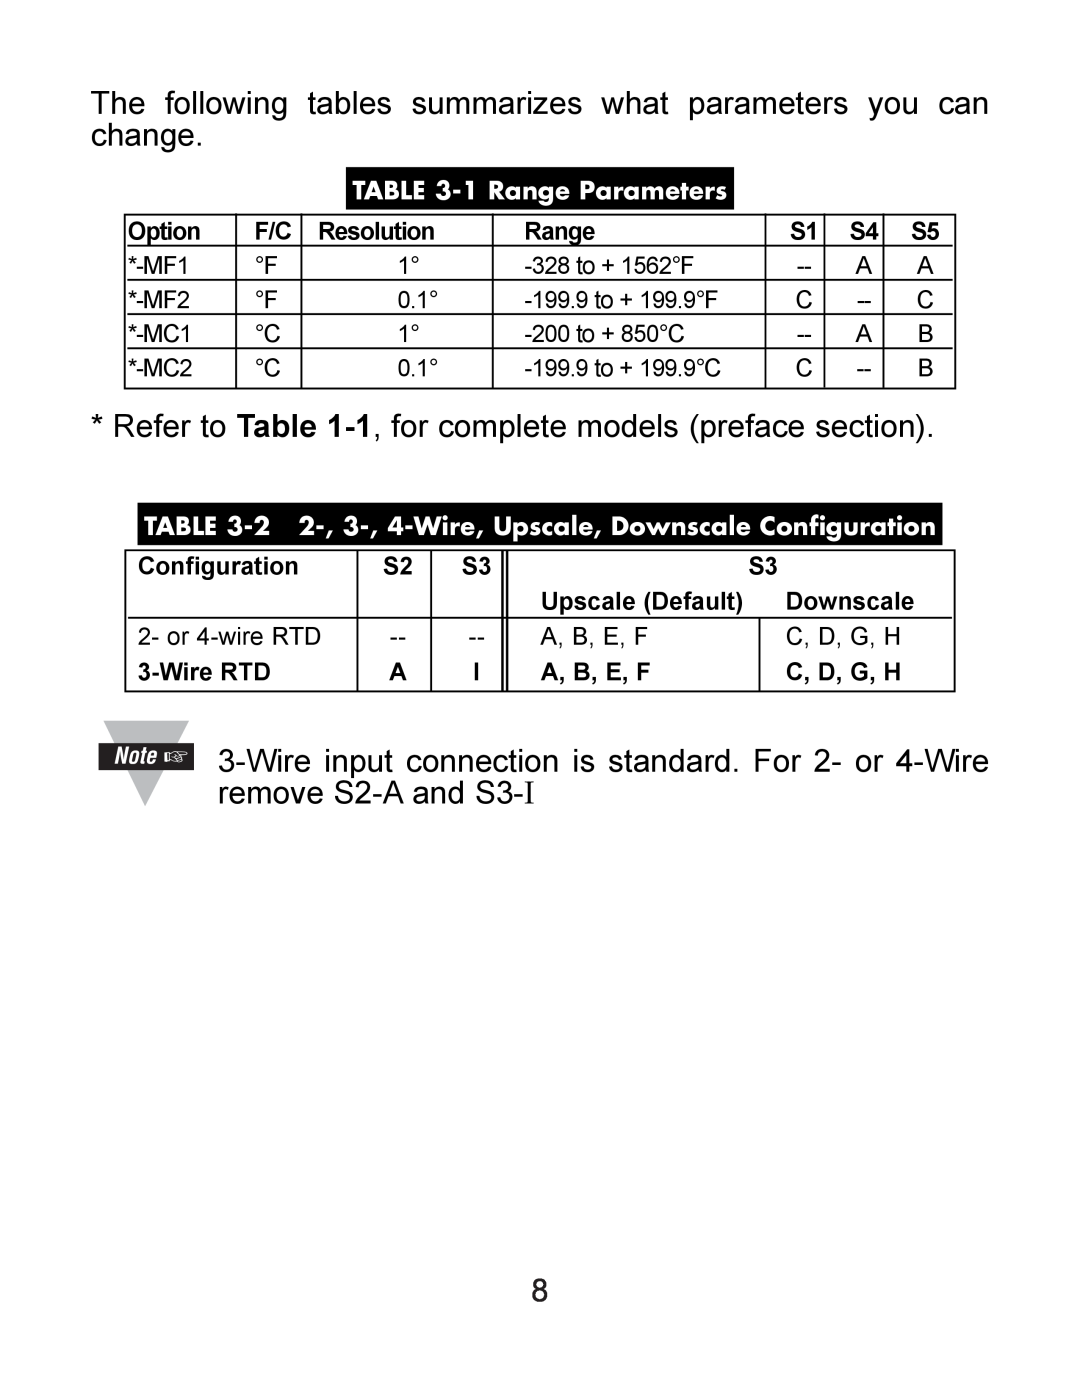 Omega DP119-RTD manual The following tables summarizes what parameters you can change, 1 Range Parameters 